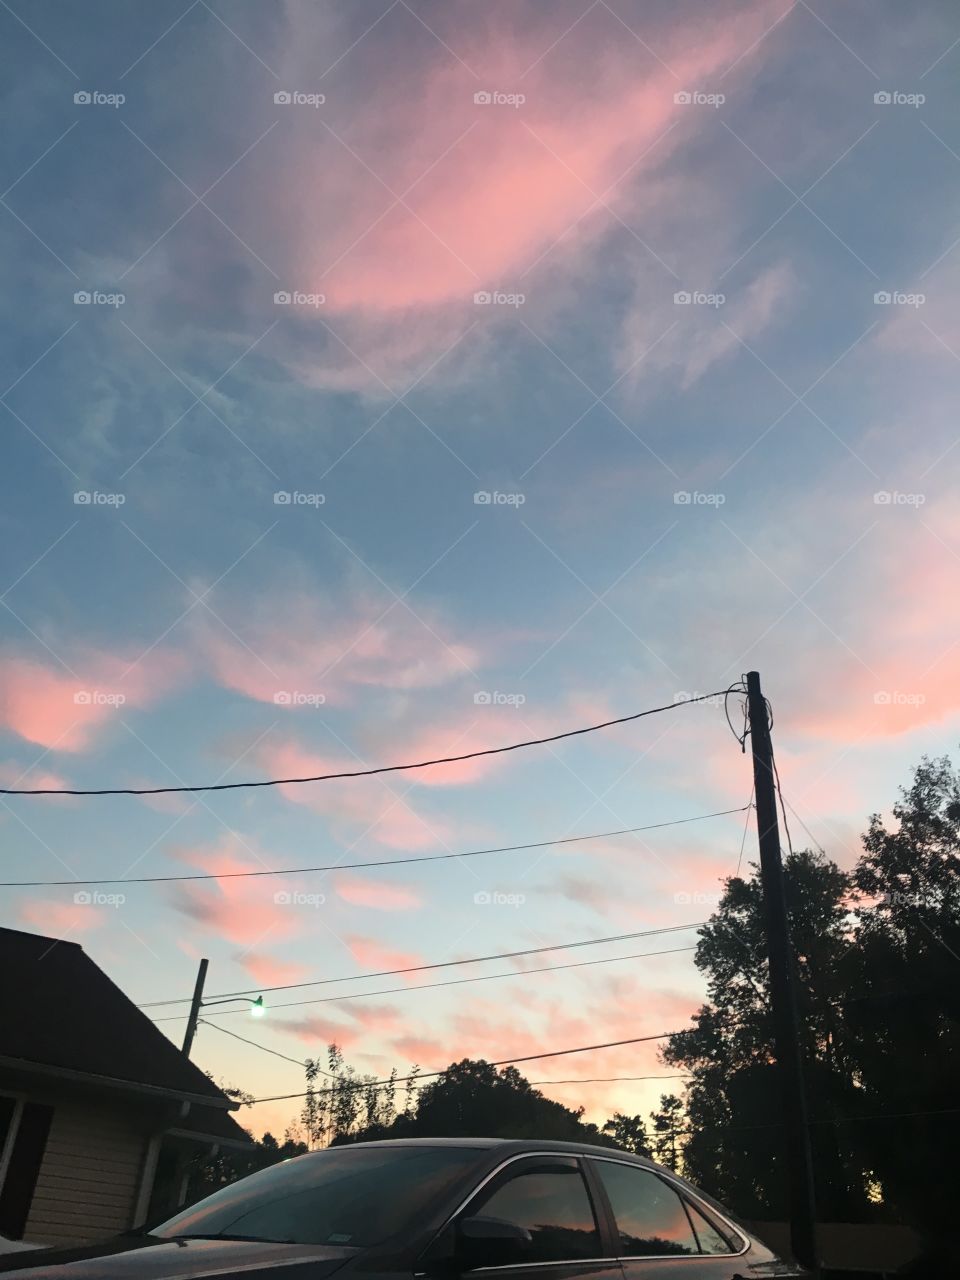 Sunset in small town